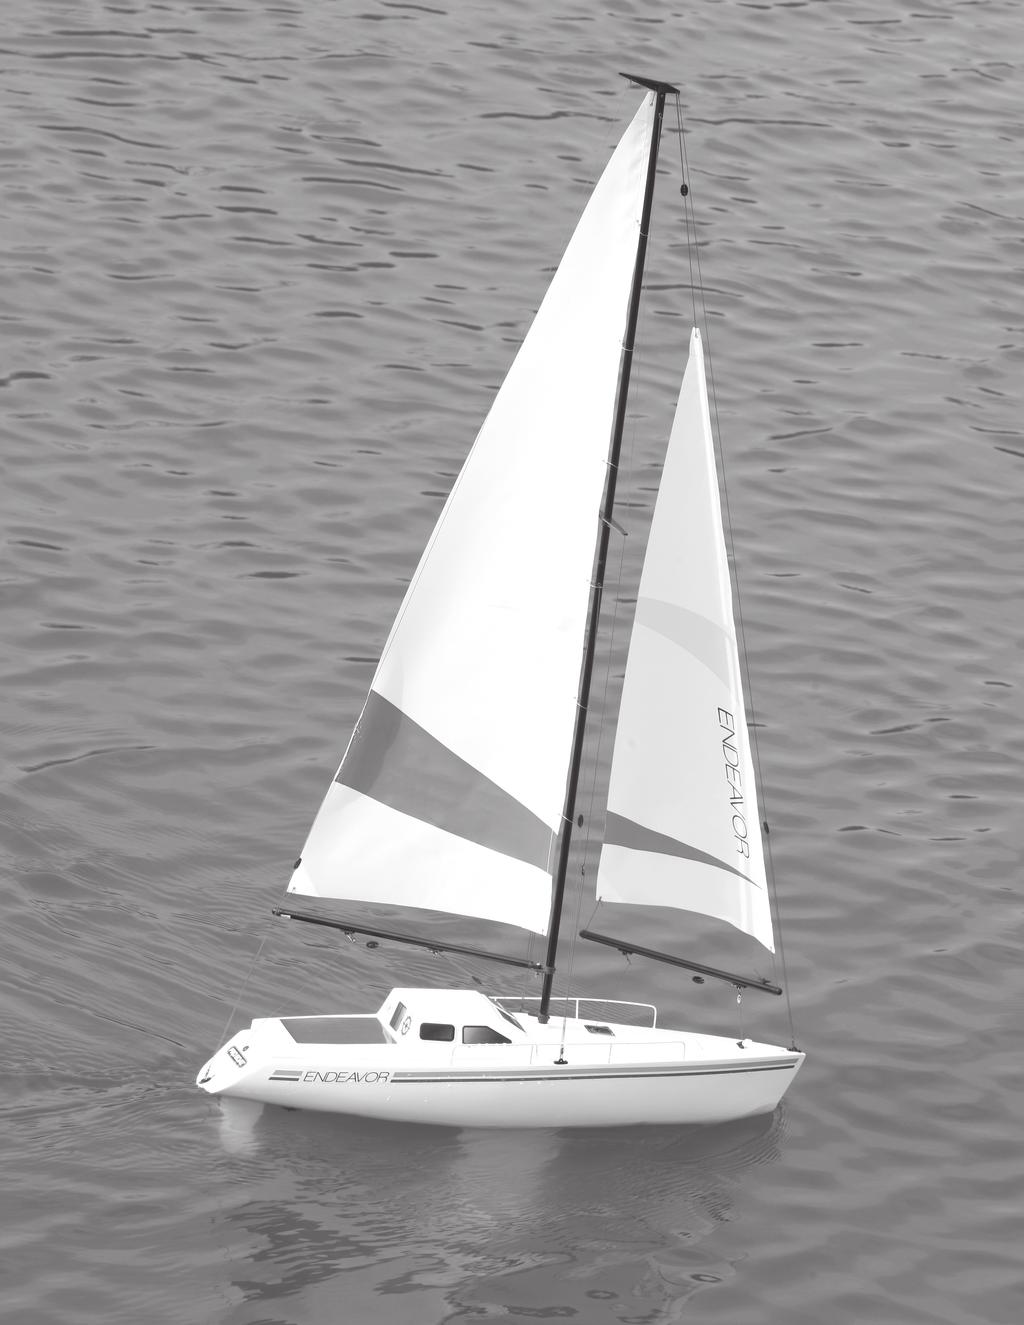 EP RTR Sailboat Owners Manual Specifications Length (Hull): 24 in (610mm) Height (Mast): 36.5 in (927mm) Beam: 6.25 in (158.75mm) Radio: Spektrum DX2M 2.